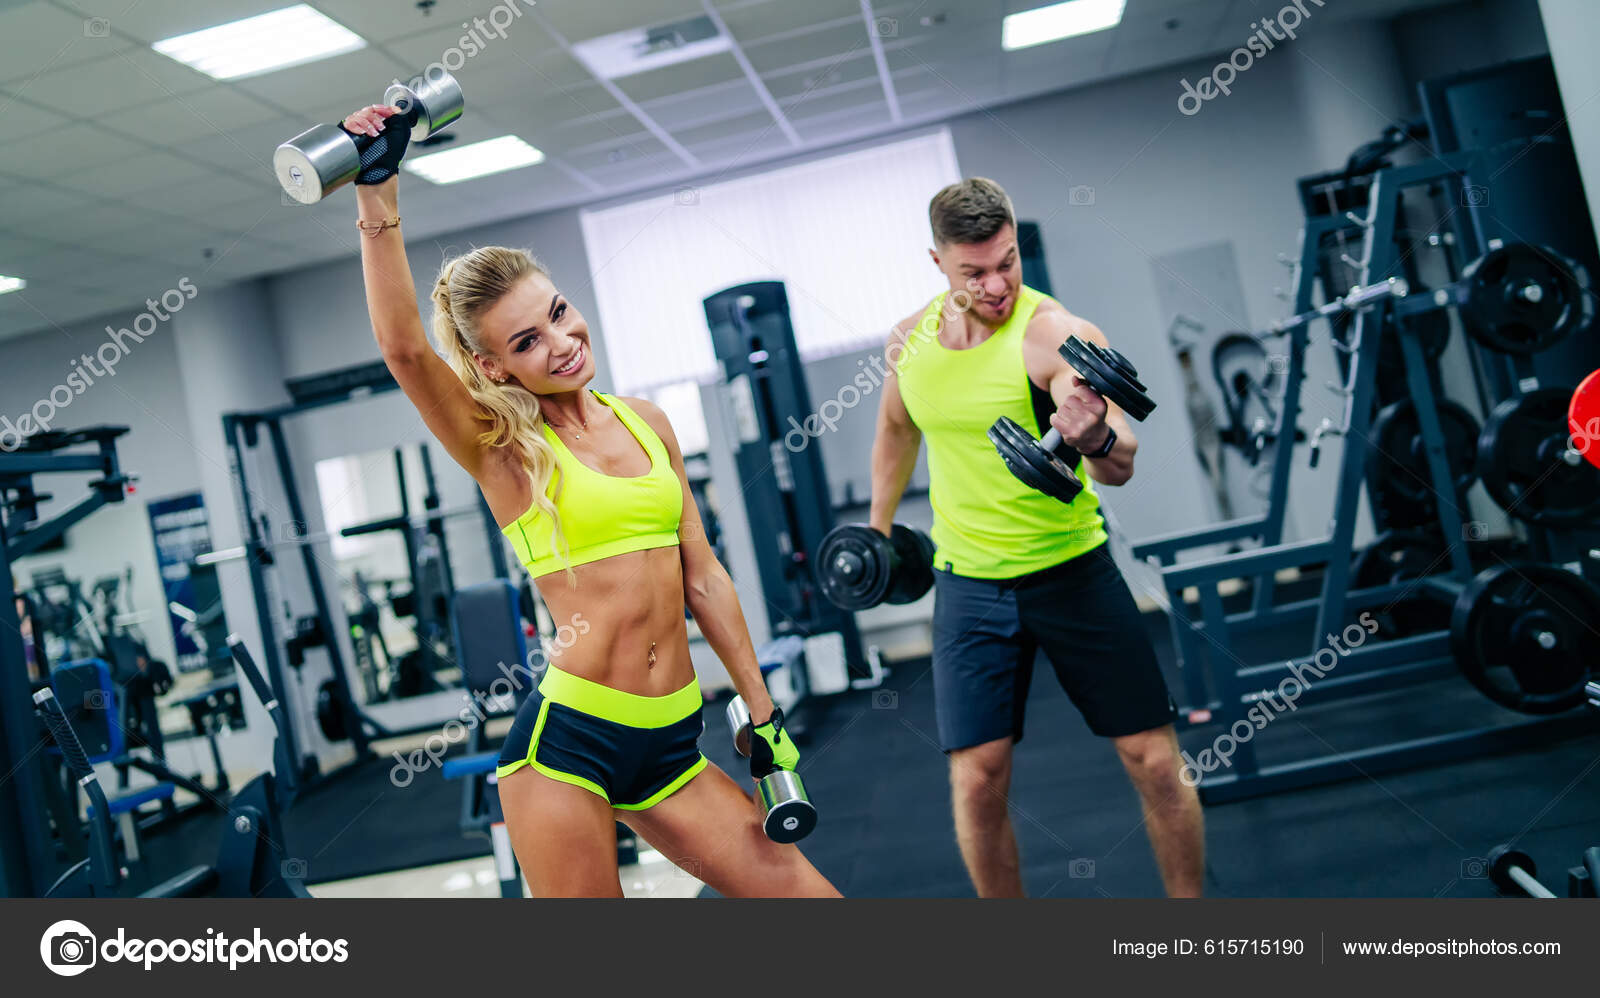 Perfect Fitness Body of Beautiful Woman. Fitness Instructor in Sports  Clothing. Female Model with Fit Muscular and Slim Body in Sportswear doing  Workout. Young Fit Girl Lifting Dumbbells. Stock Photo